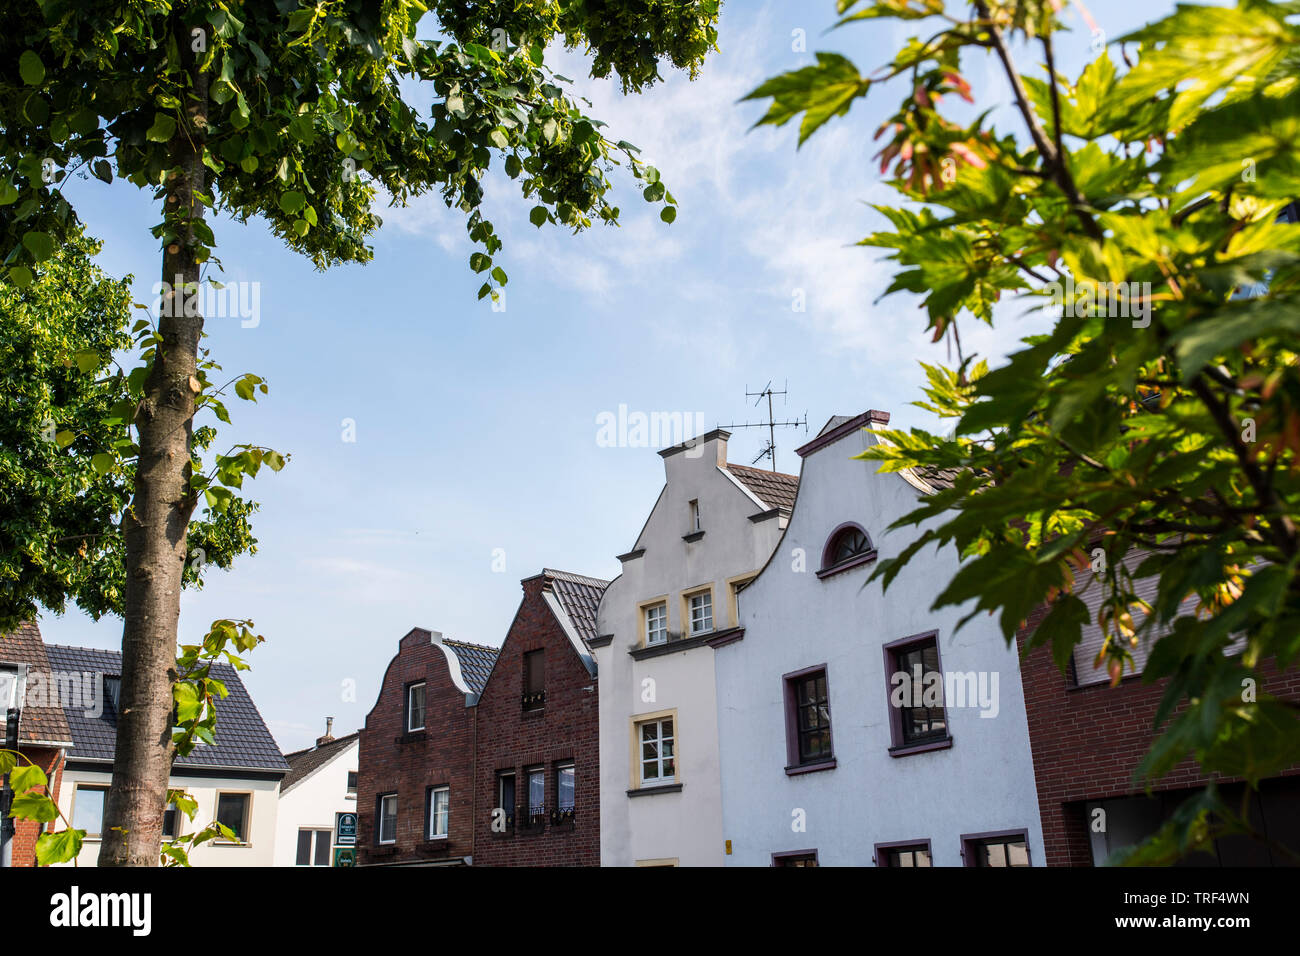 Duesseldorf Hamm, neighbourhood with long tradition. 625 years old. Stock Photo